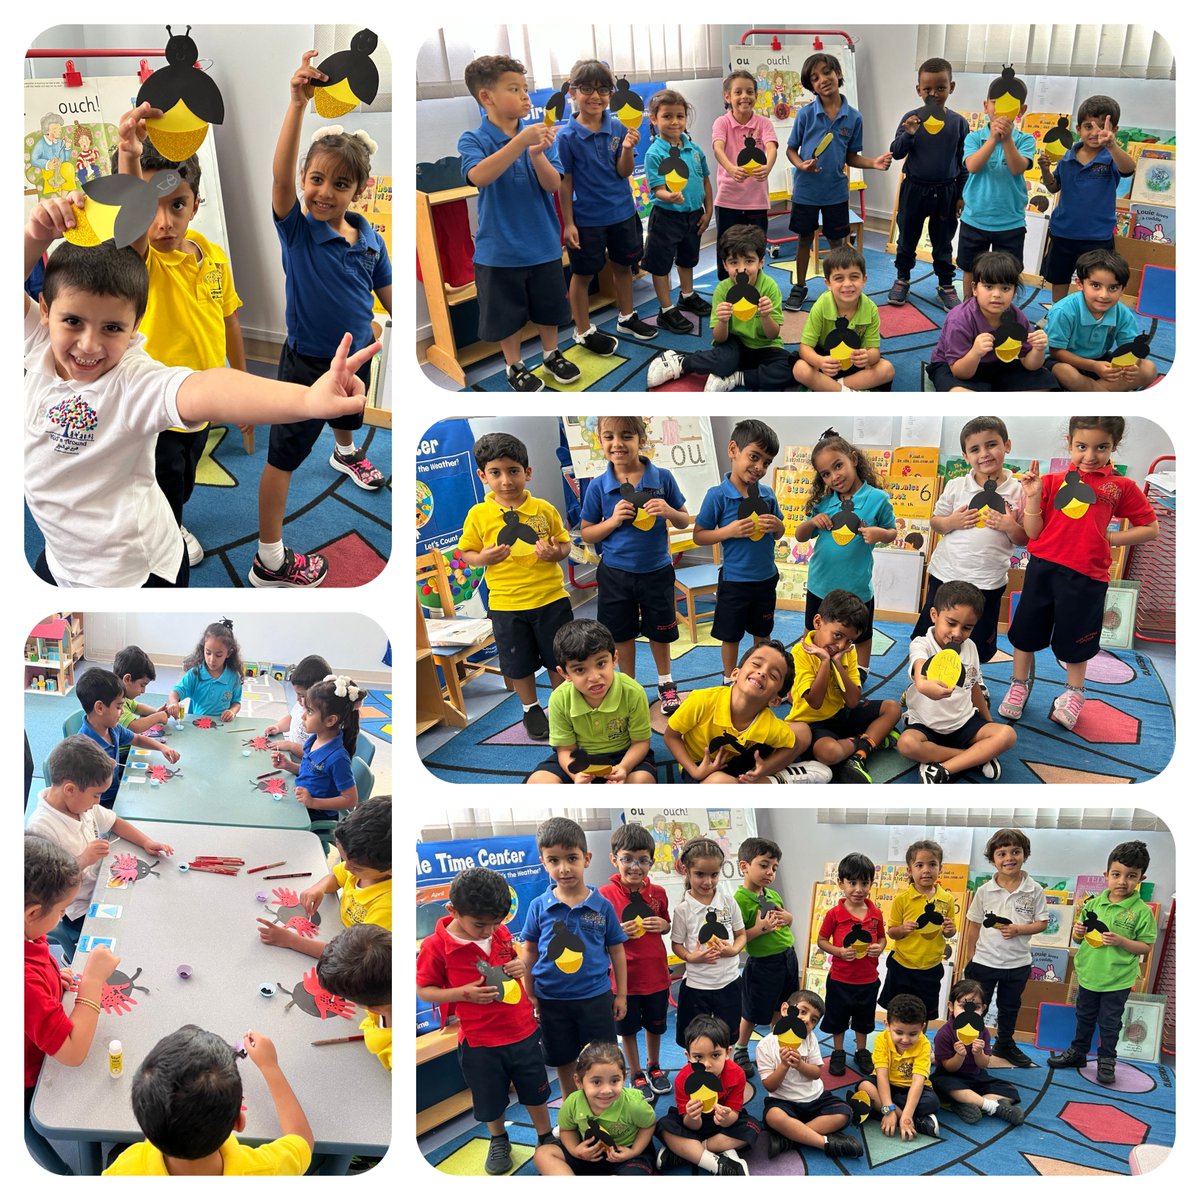 Last Thursday, we concluded book week with an array of activities based on different books written by the author Eric Carle.
#bookweek #readingisfun #EricCarle #bookworms #creatitivy #learningisfun #KidnAround #KidnAroundKindergarten #KG #EYFS #EarlyYears #Qatar #Doha #Kids